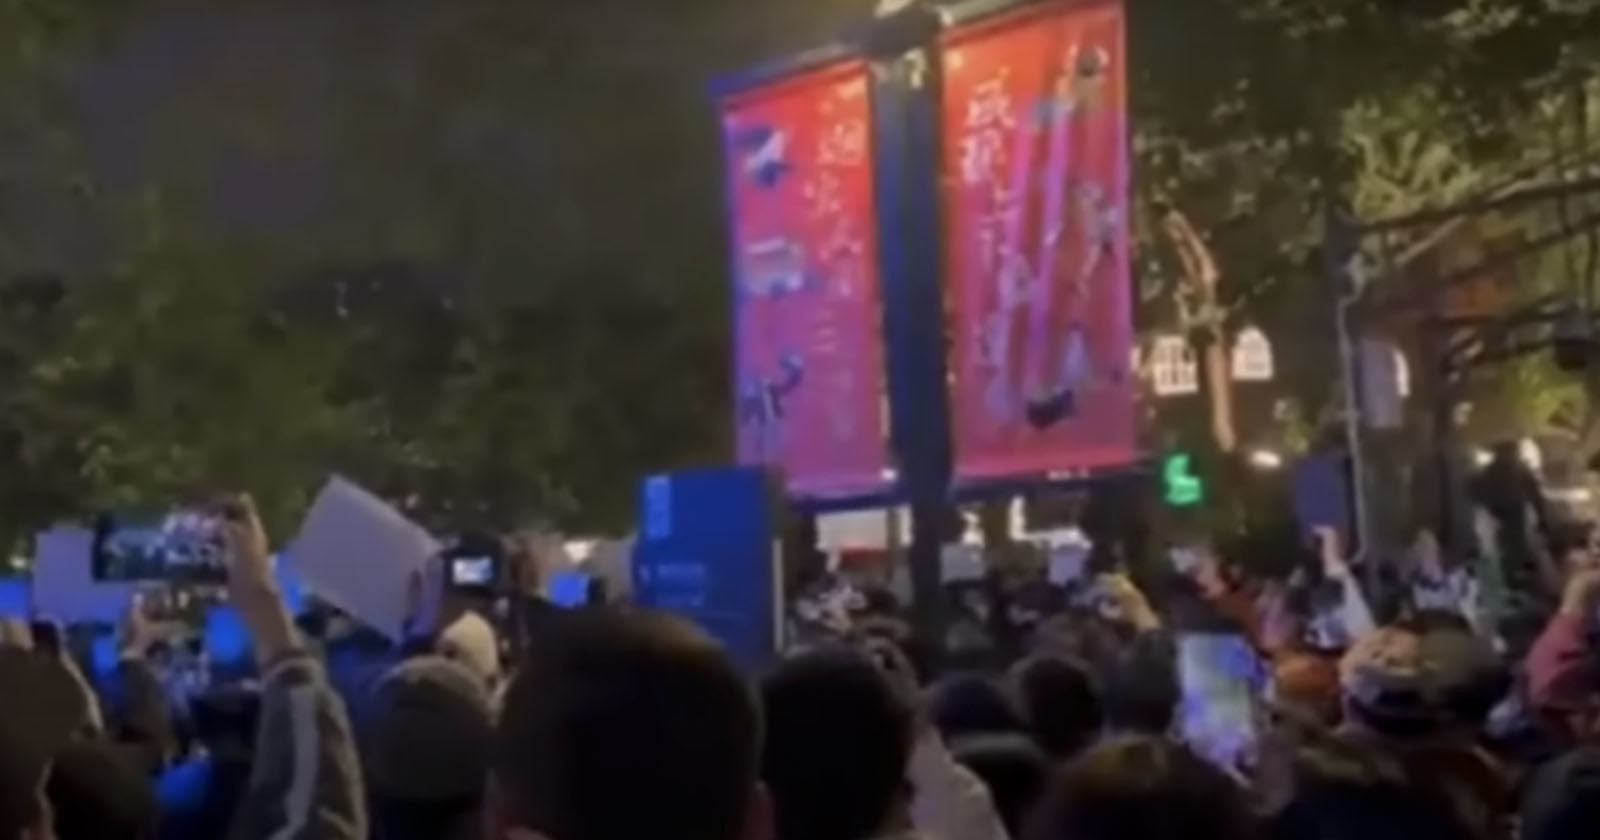 Chinese Protestors are Flipping Videos and Using Filters to Evade Internet Police